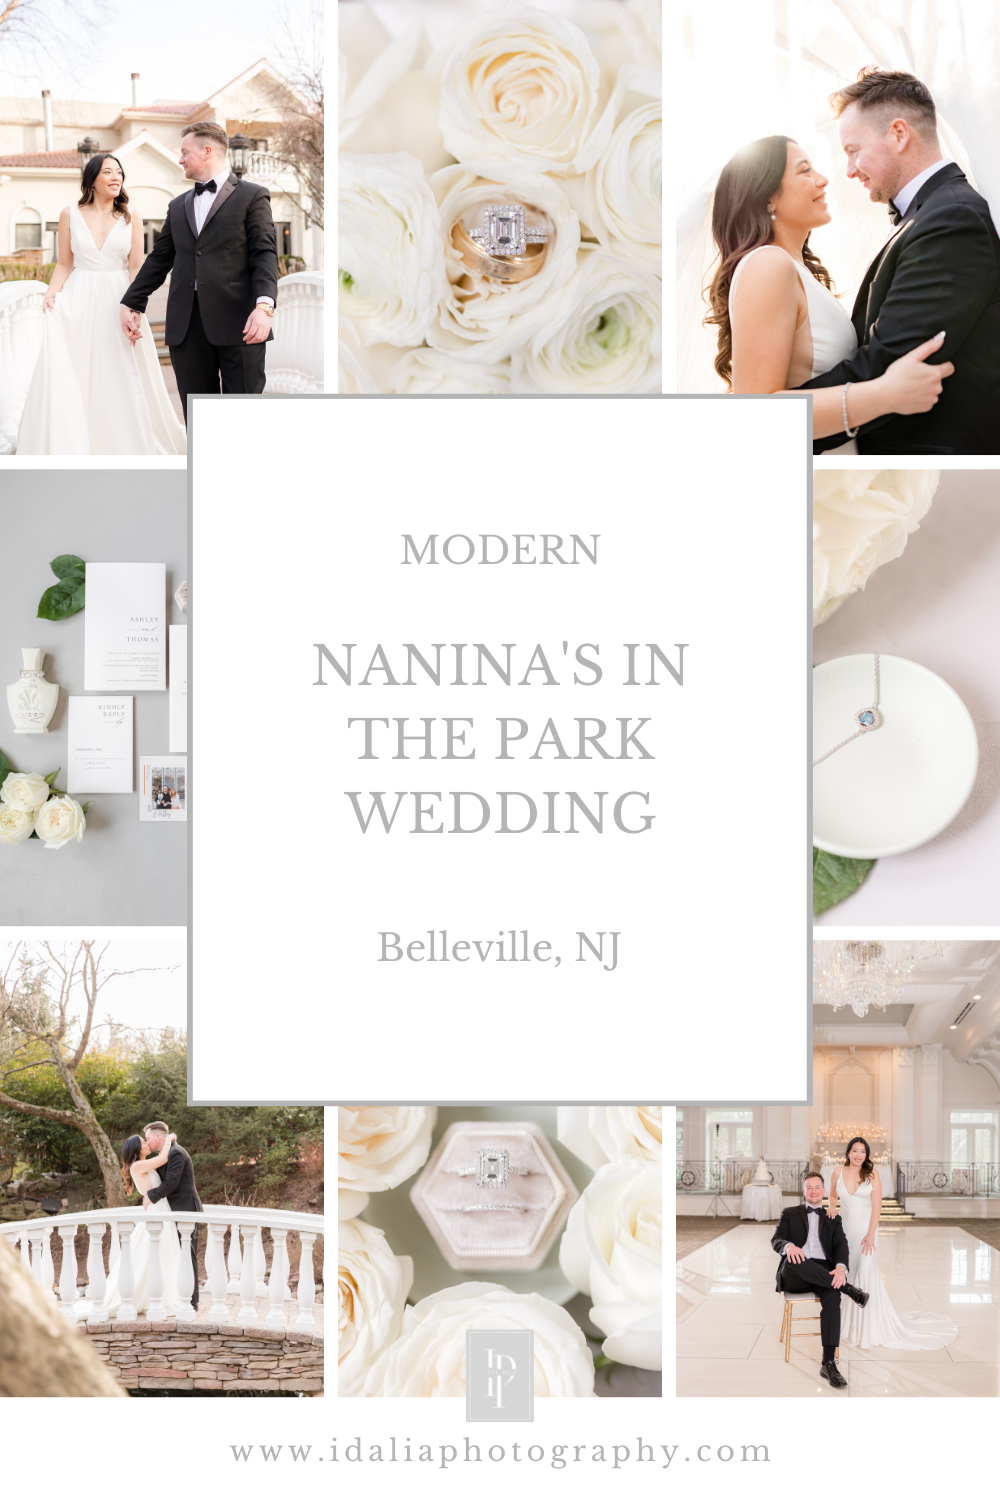 Nanina's in the Park wedding with a ceremony at The Cathedral Basilica of the Sacred Heart photographed by Idalia Photography